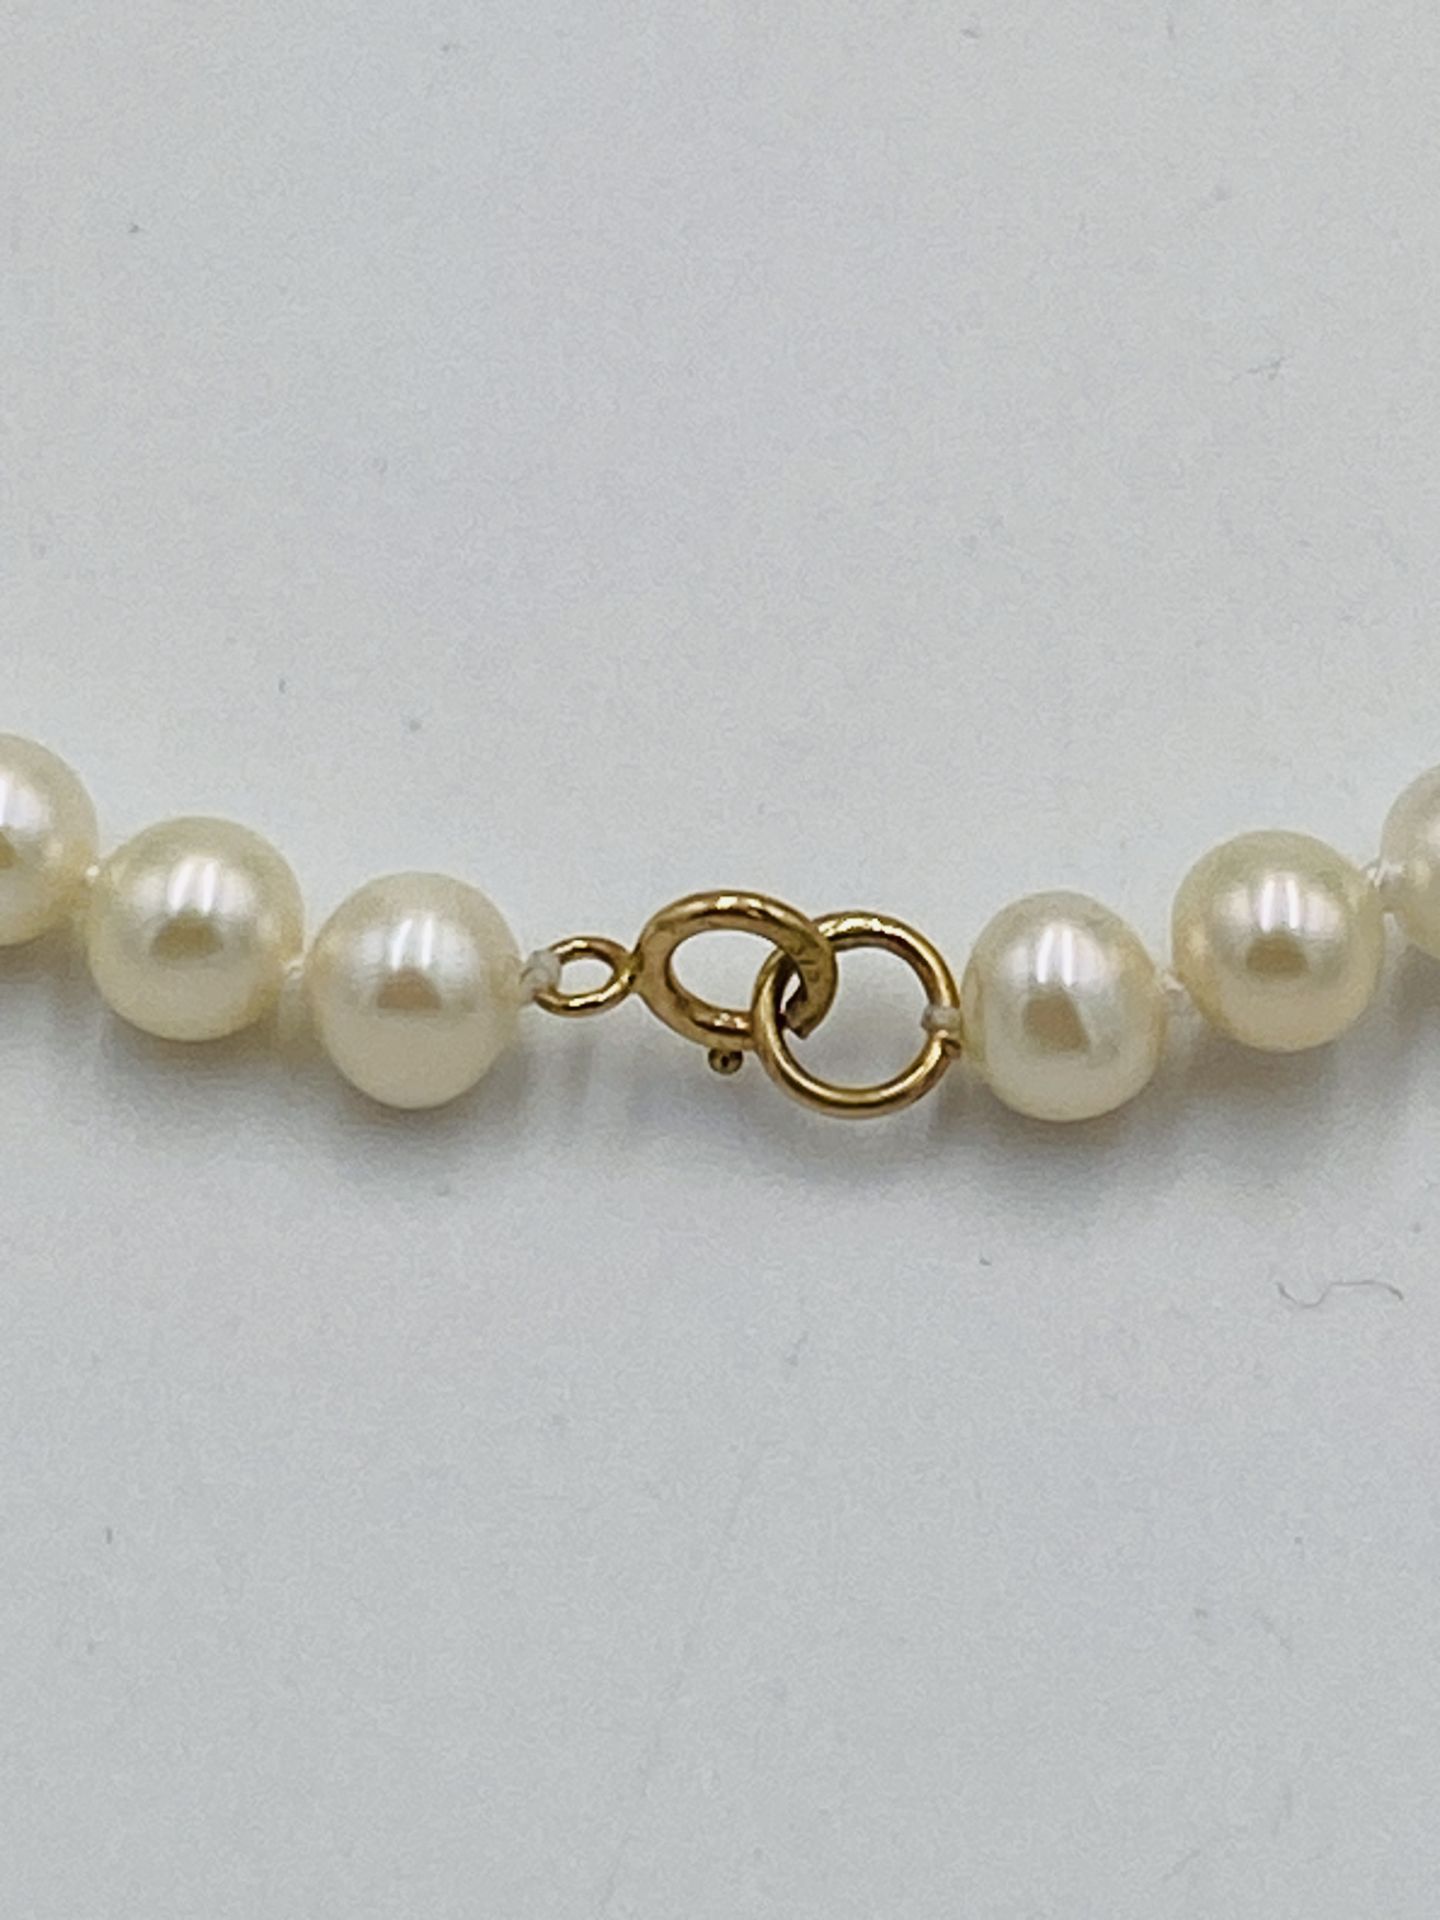 Pearl necklace with 9ct gold clasp - Bild 4 aus 4